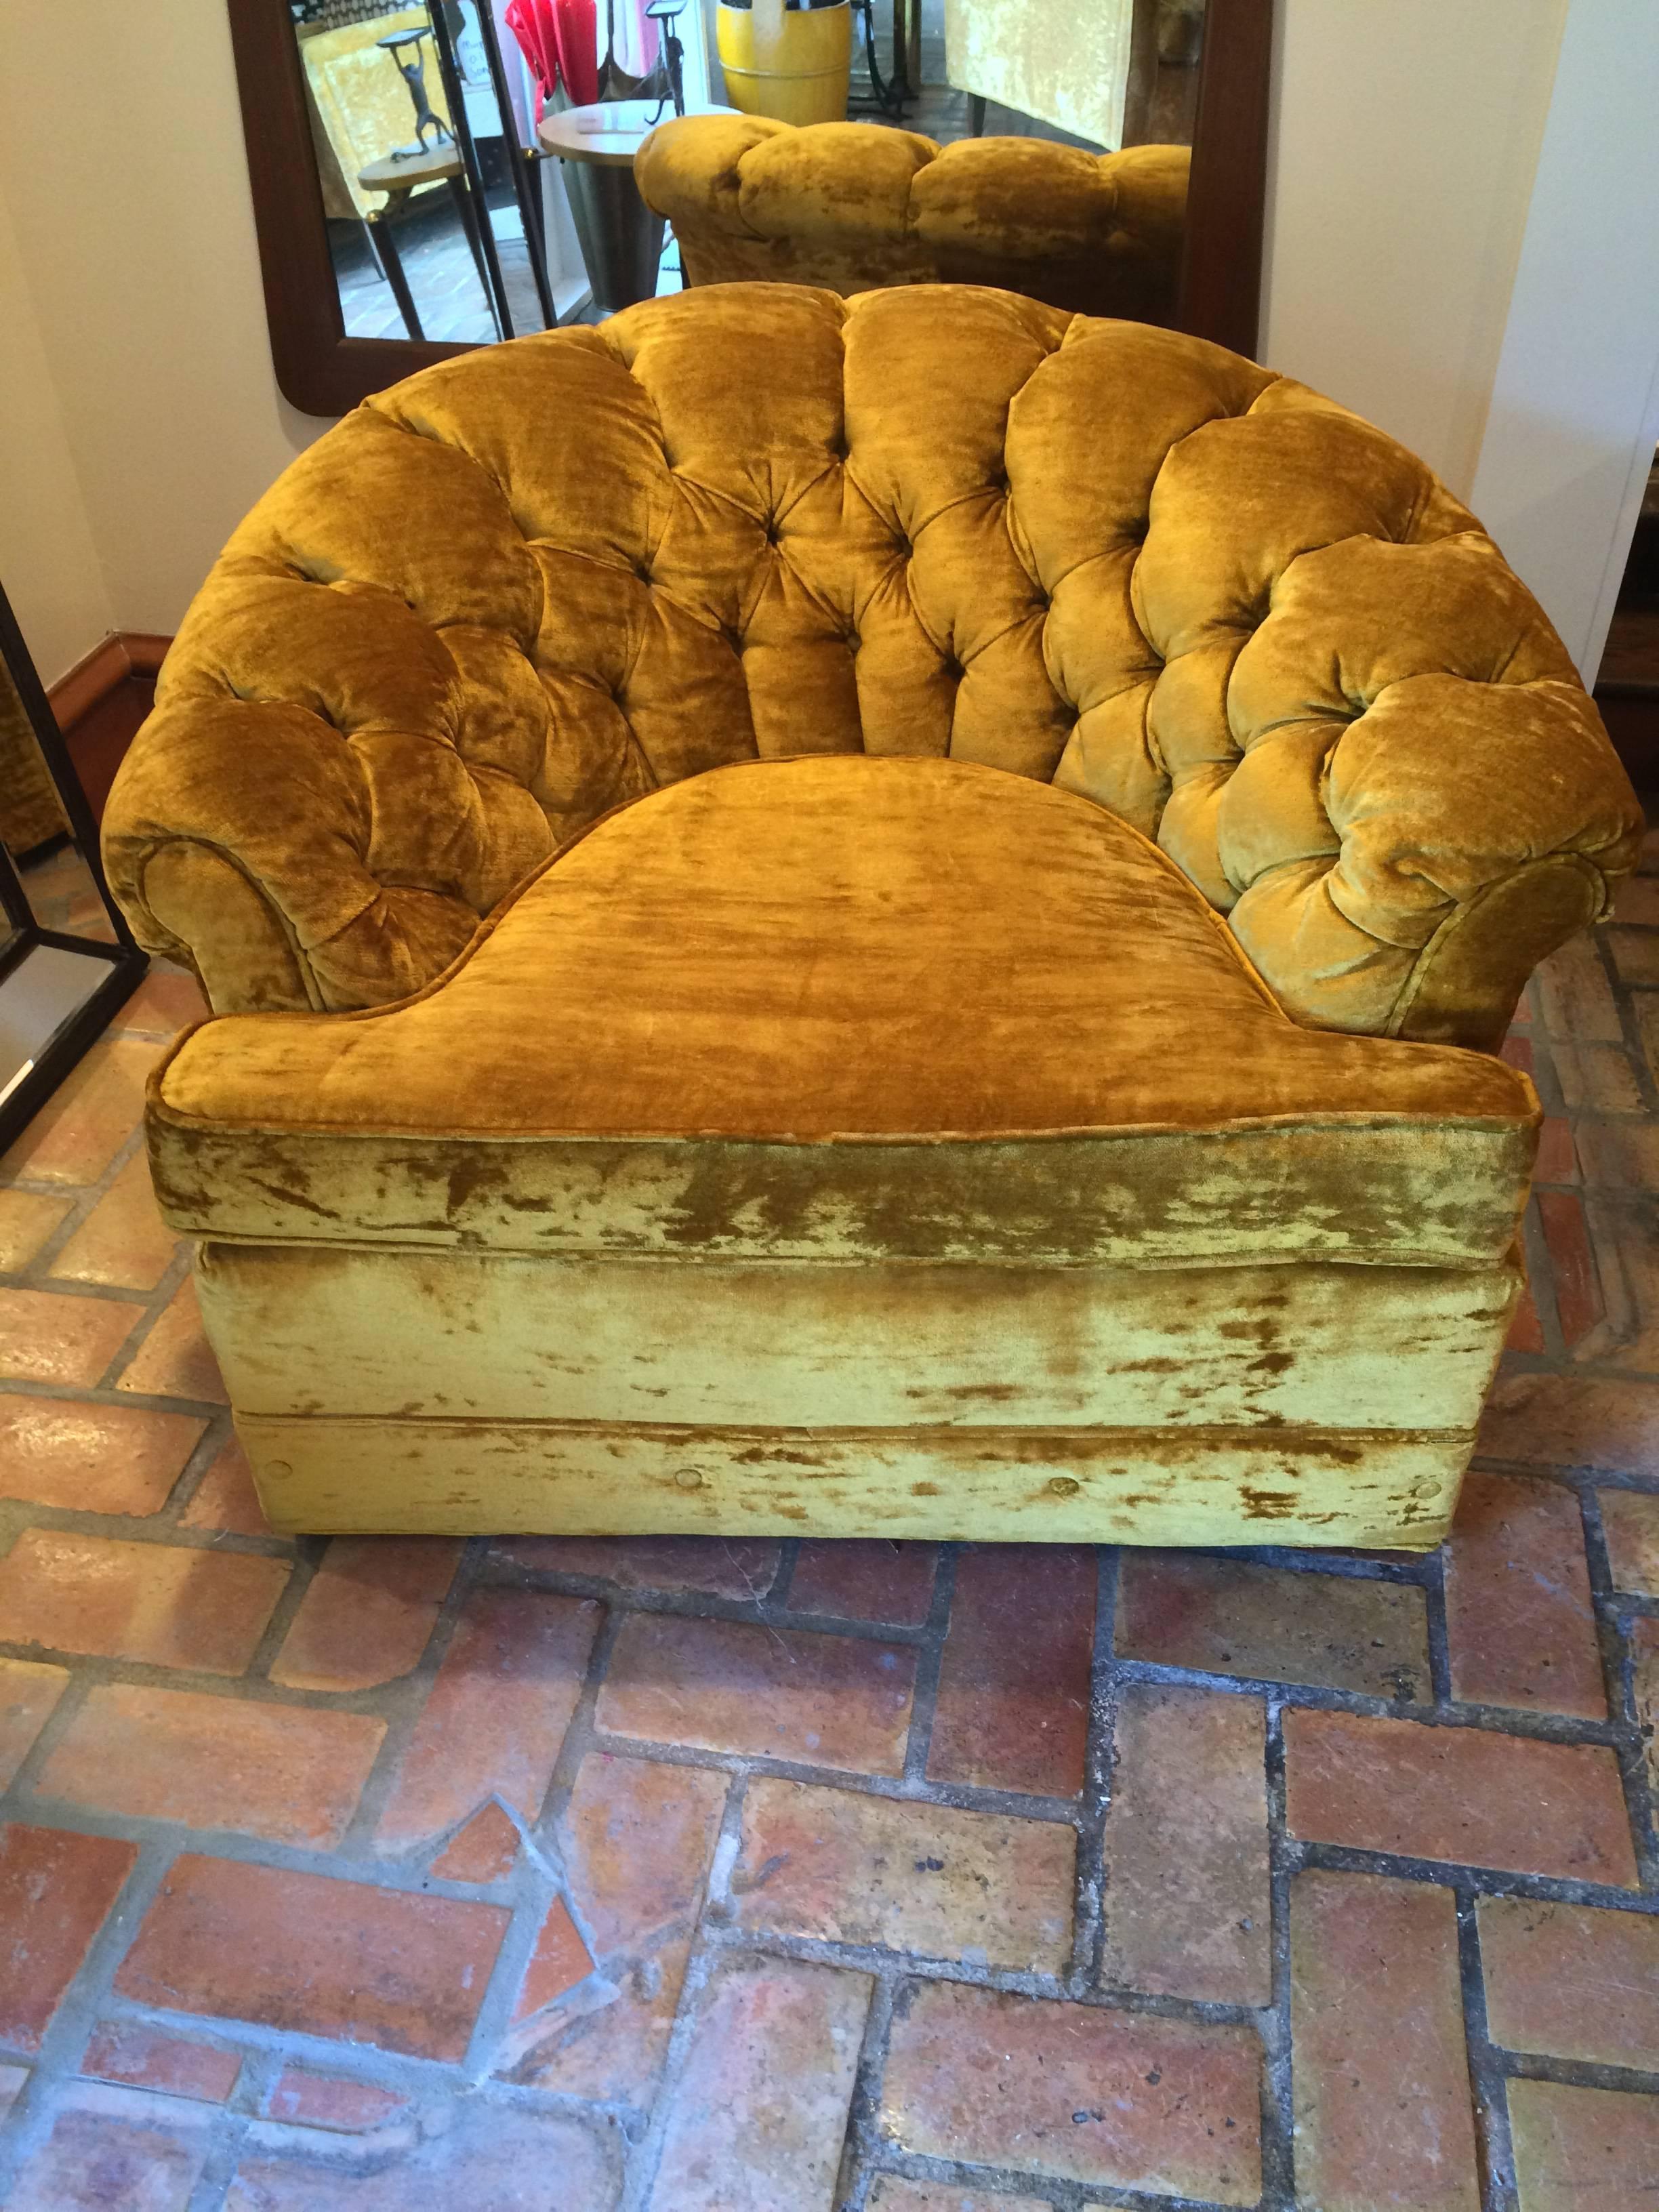 Hollywood Regency crushed velvet club chair. In a lovely golden-yellow mustard color. Sink into this chair and you will not want to get up.